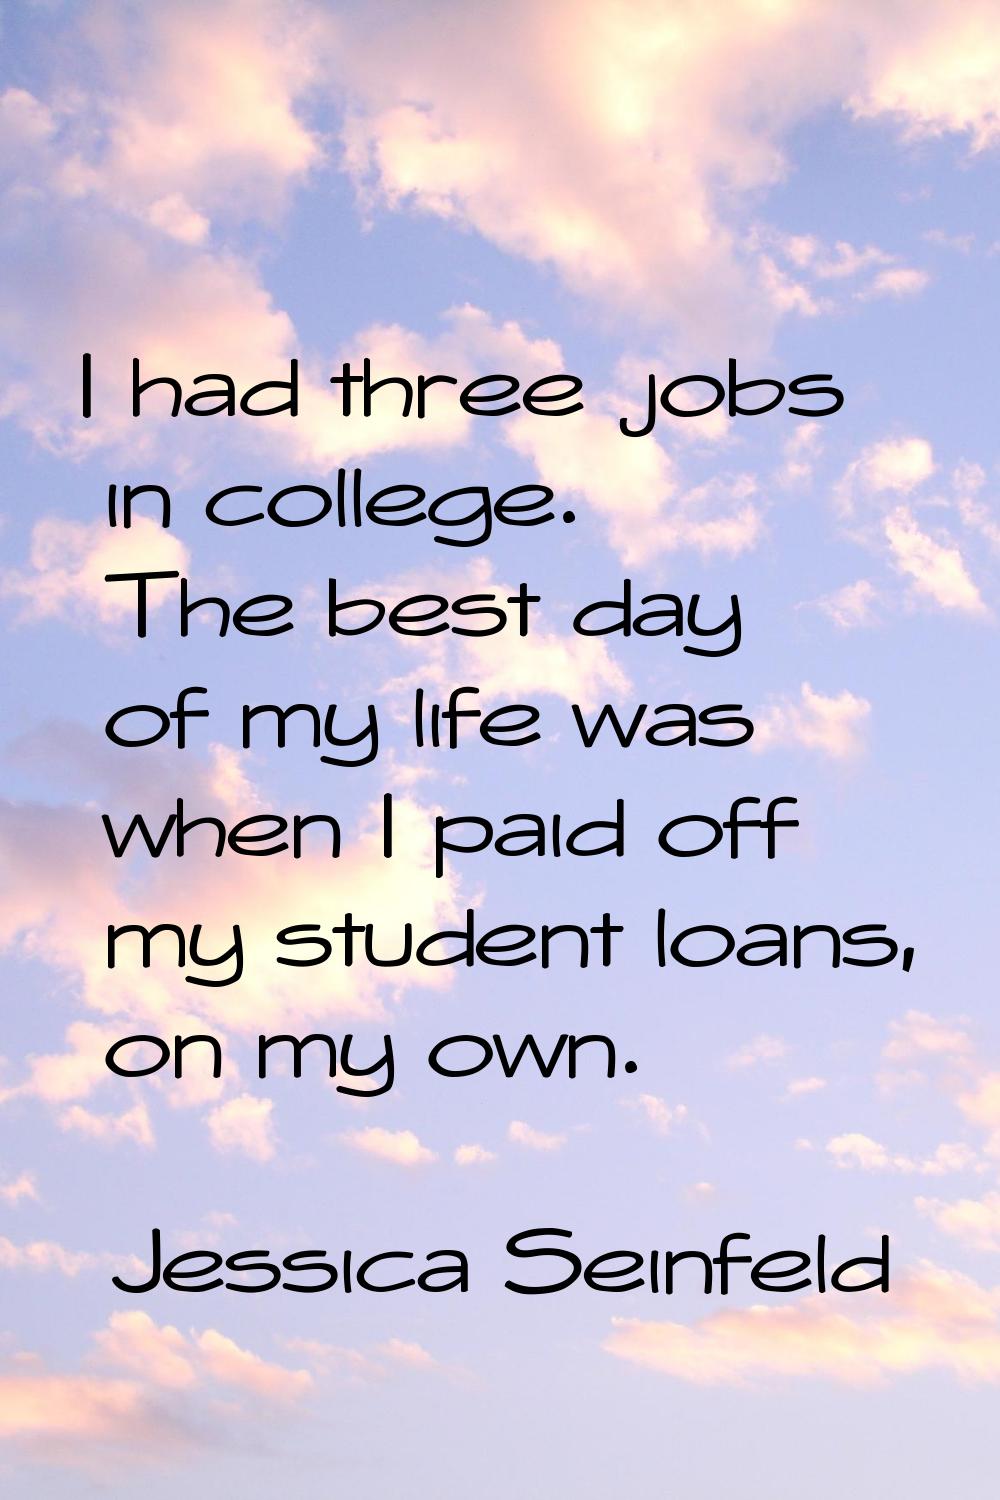 I had three jobs in college. The best day of my life was when I paid off my student loans, on my ow